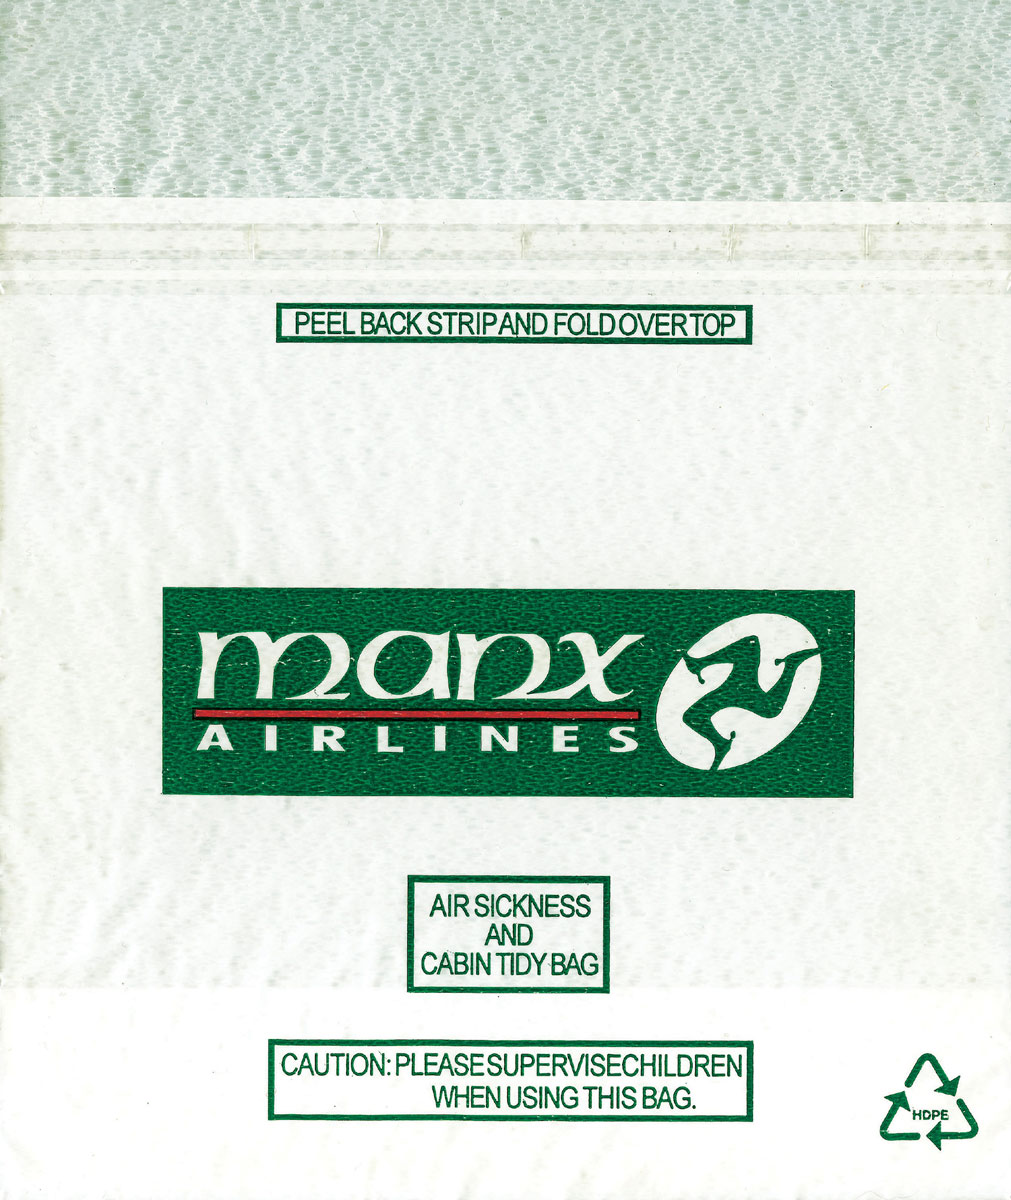 A photograph of a Manx Airlines airsickness bag with a triskelion symbol next to Airline name.